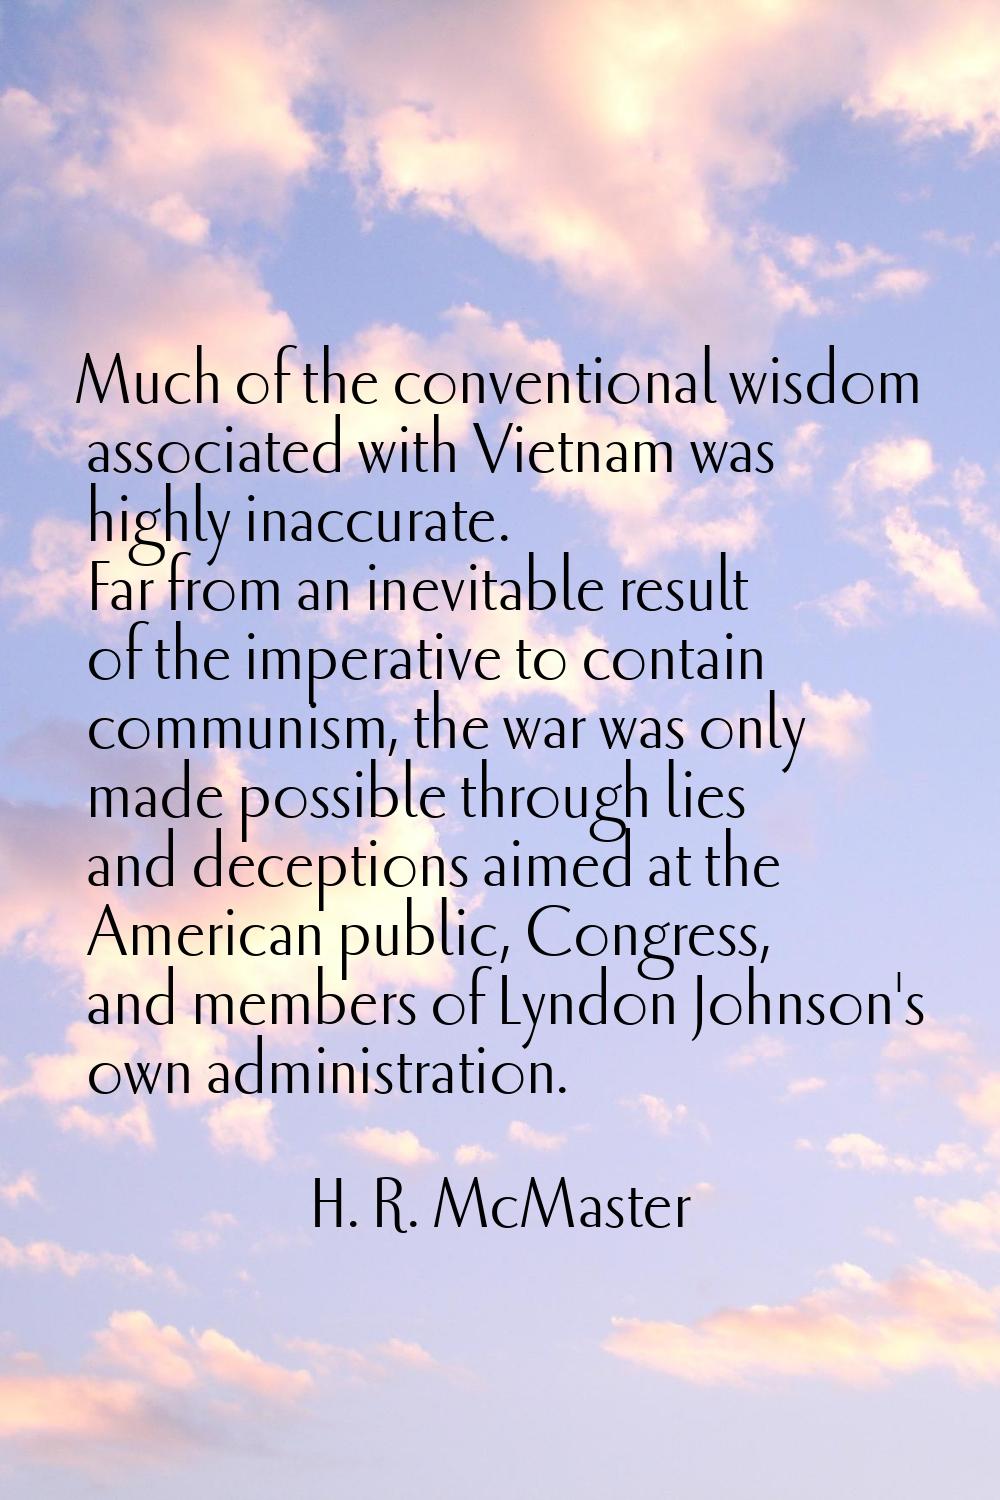 Much of the conventional wisdom associated with Vietnam was highly inaccurate. Far from an inevitab